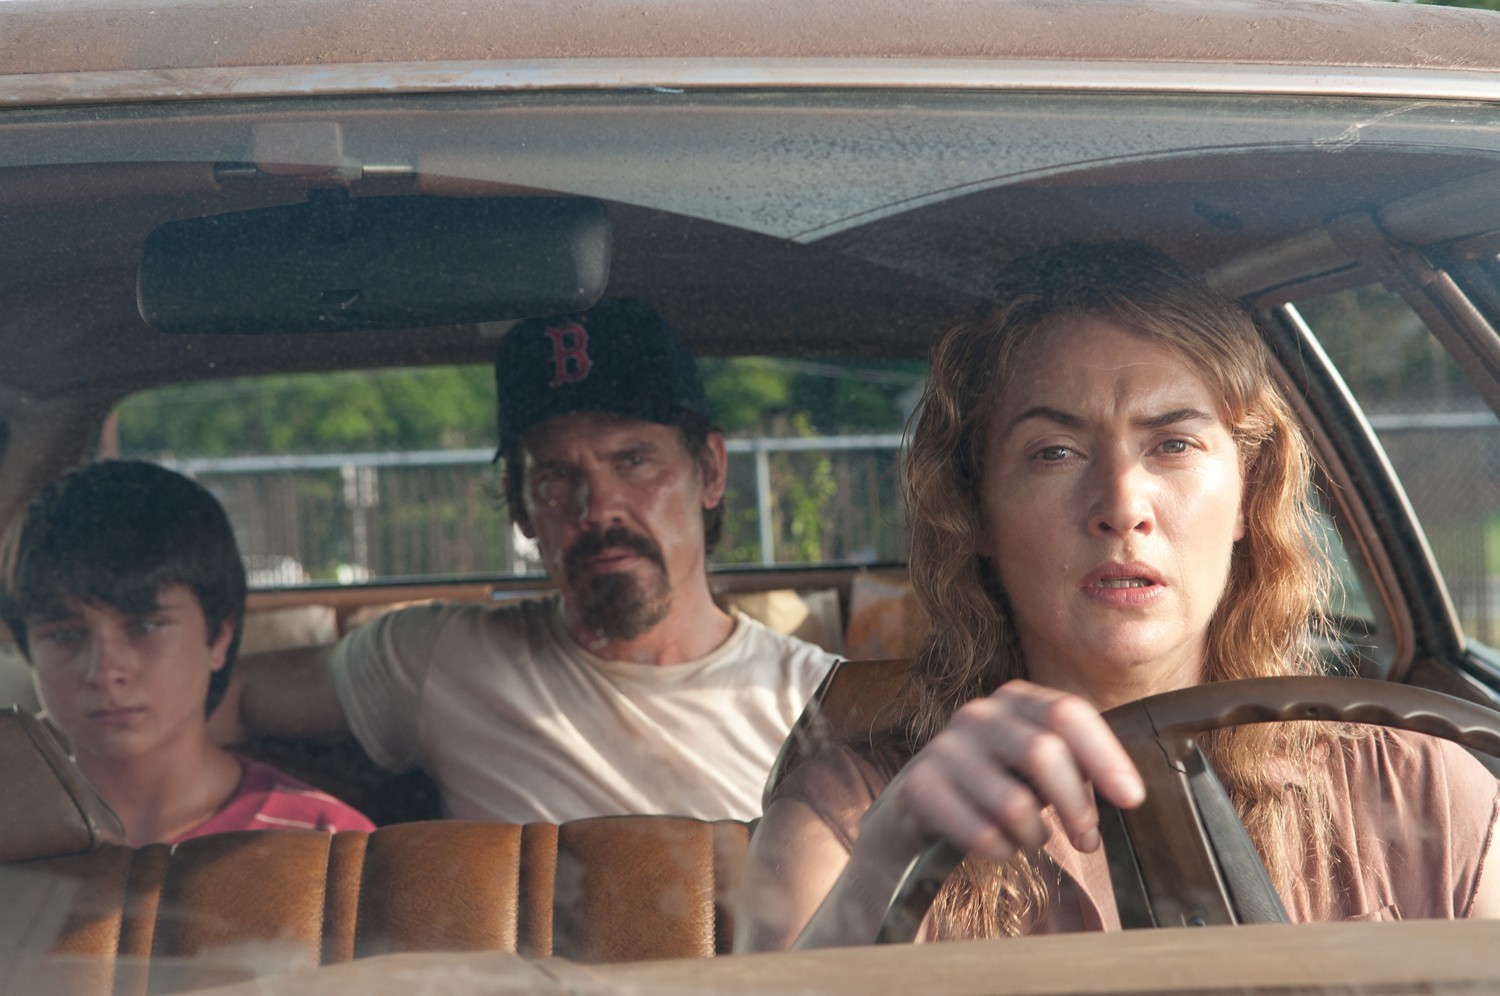 Gattlin Griffith, Josh Brolin and Kate Winslet in Paramount Pictures' Labor Day (2014)